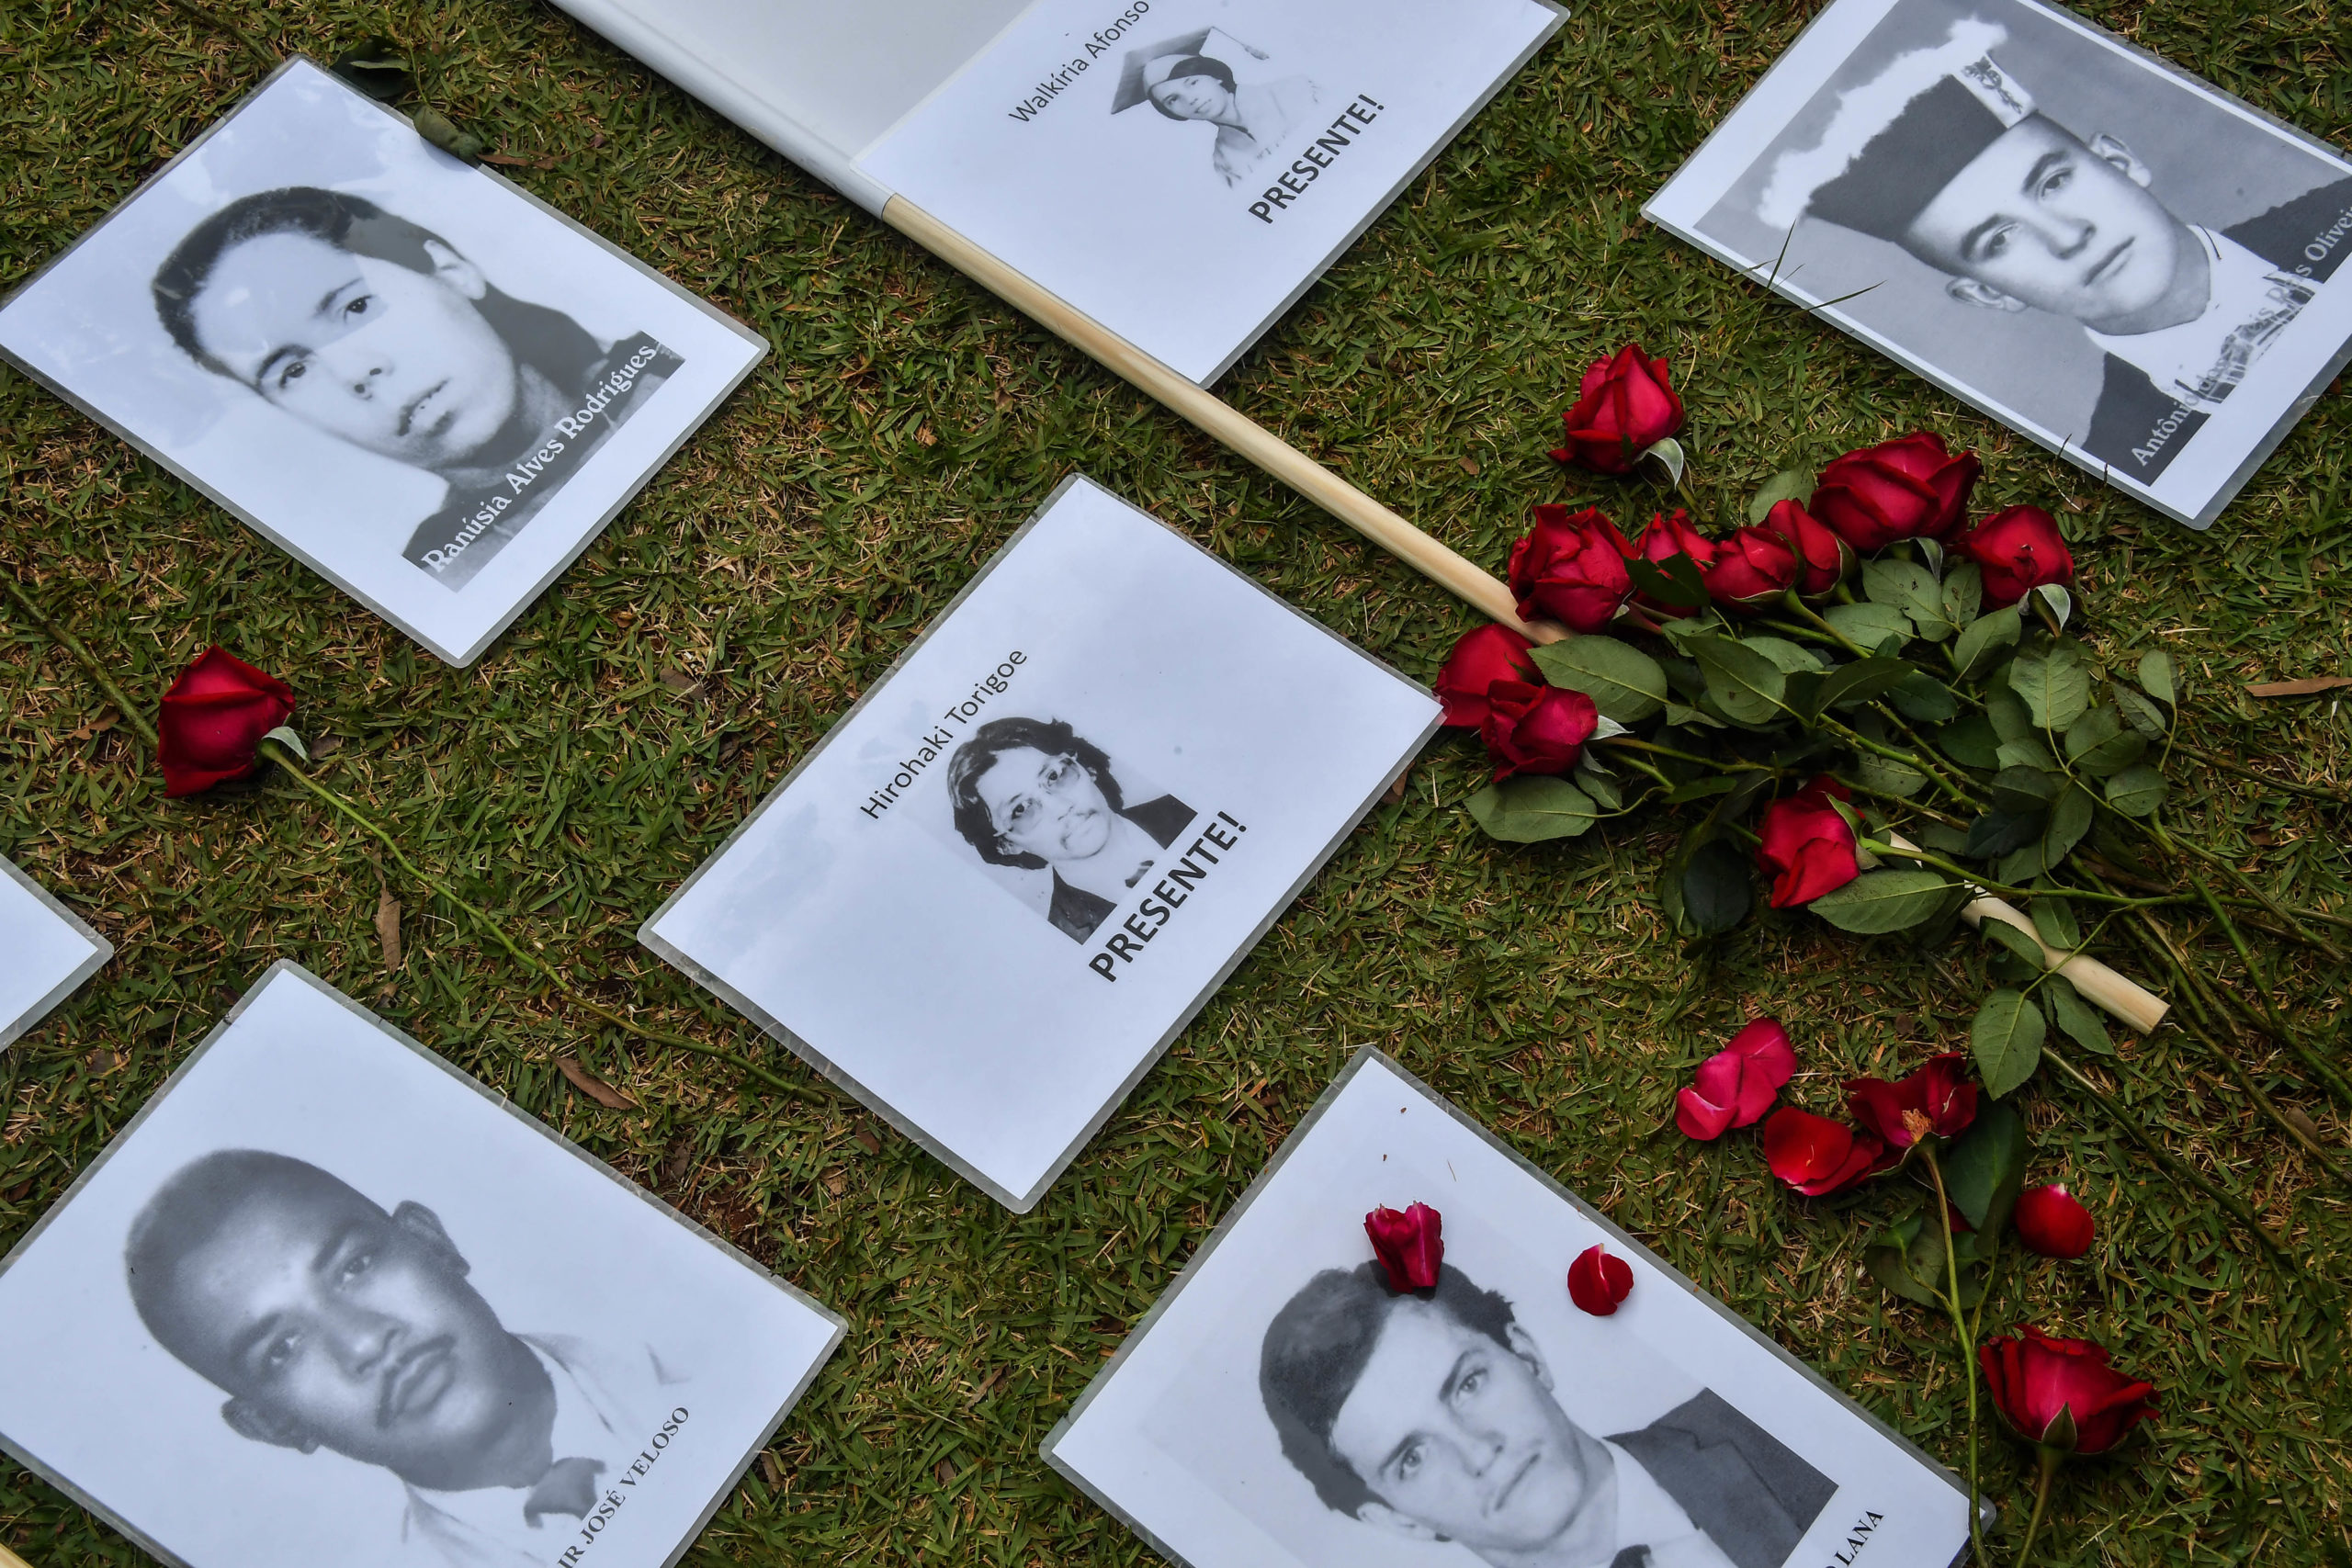 Portraits of persons who were killed or went missing during the 1964-1985 dictatorship are displayed during a demonstration on the 55th anniversary of the military coup, at Ibirapuera Park, in Sao Paulo, Brazil, on March 31, 2019. - Thousands of protesters took to the streets of Brazil for the 55th anniversary of the coup that established more than two decades of military rule. Further demonstrations are planned in other cities after far-right President Jair Bolsonaro sparked widespread anger by ordering the defence forces to commemorate the overthrow of President Joao Goulart. (Photo by NELSON ALMEIDA / AFP)